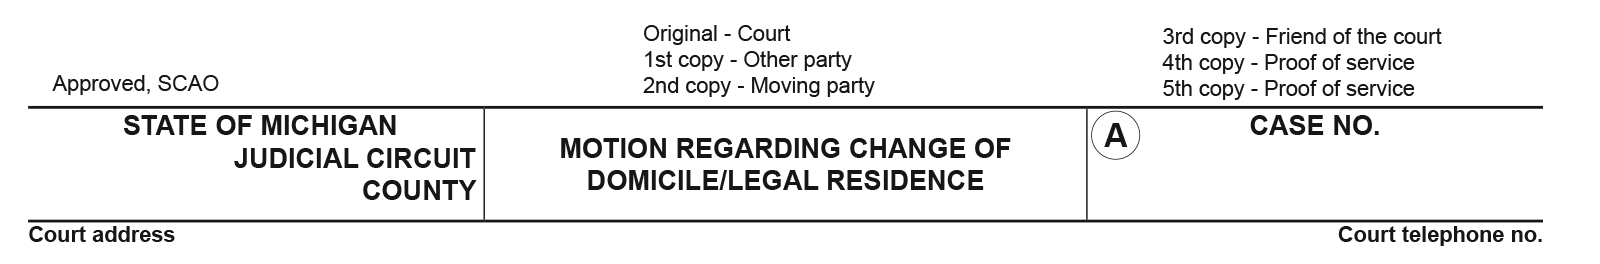 Legal form used to change your legal domicile or residence in the State of Michigan